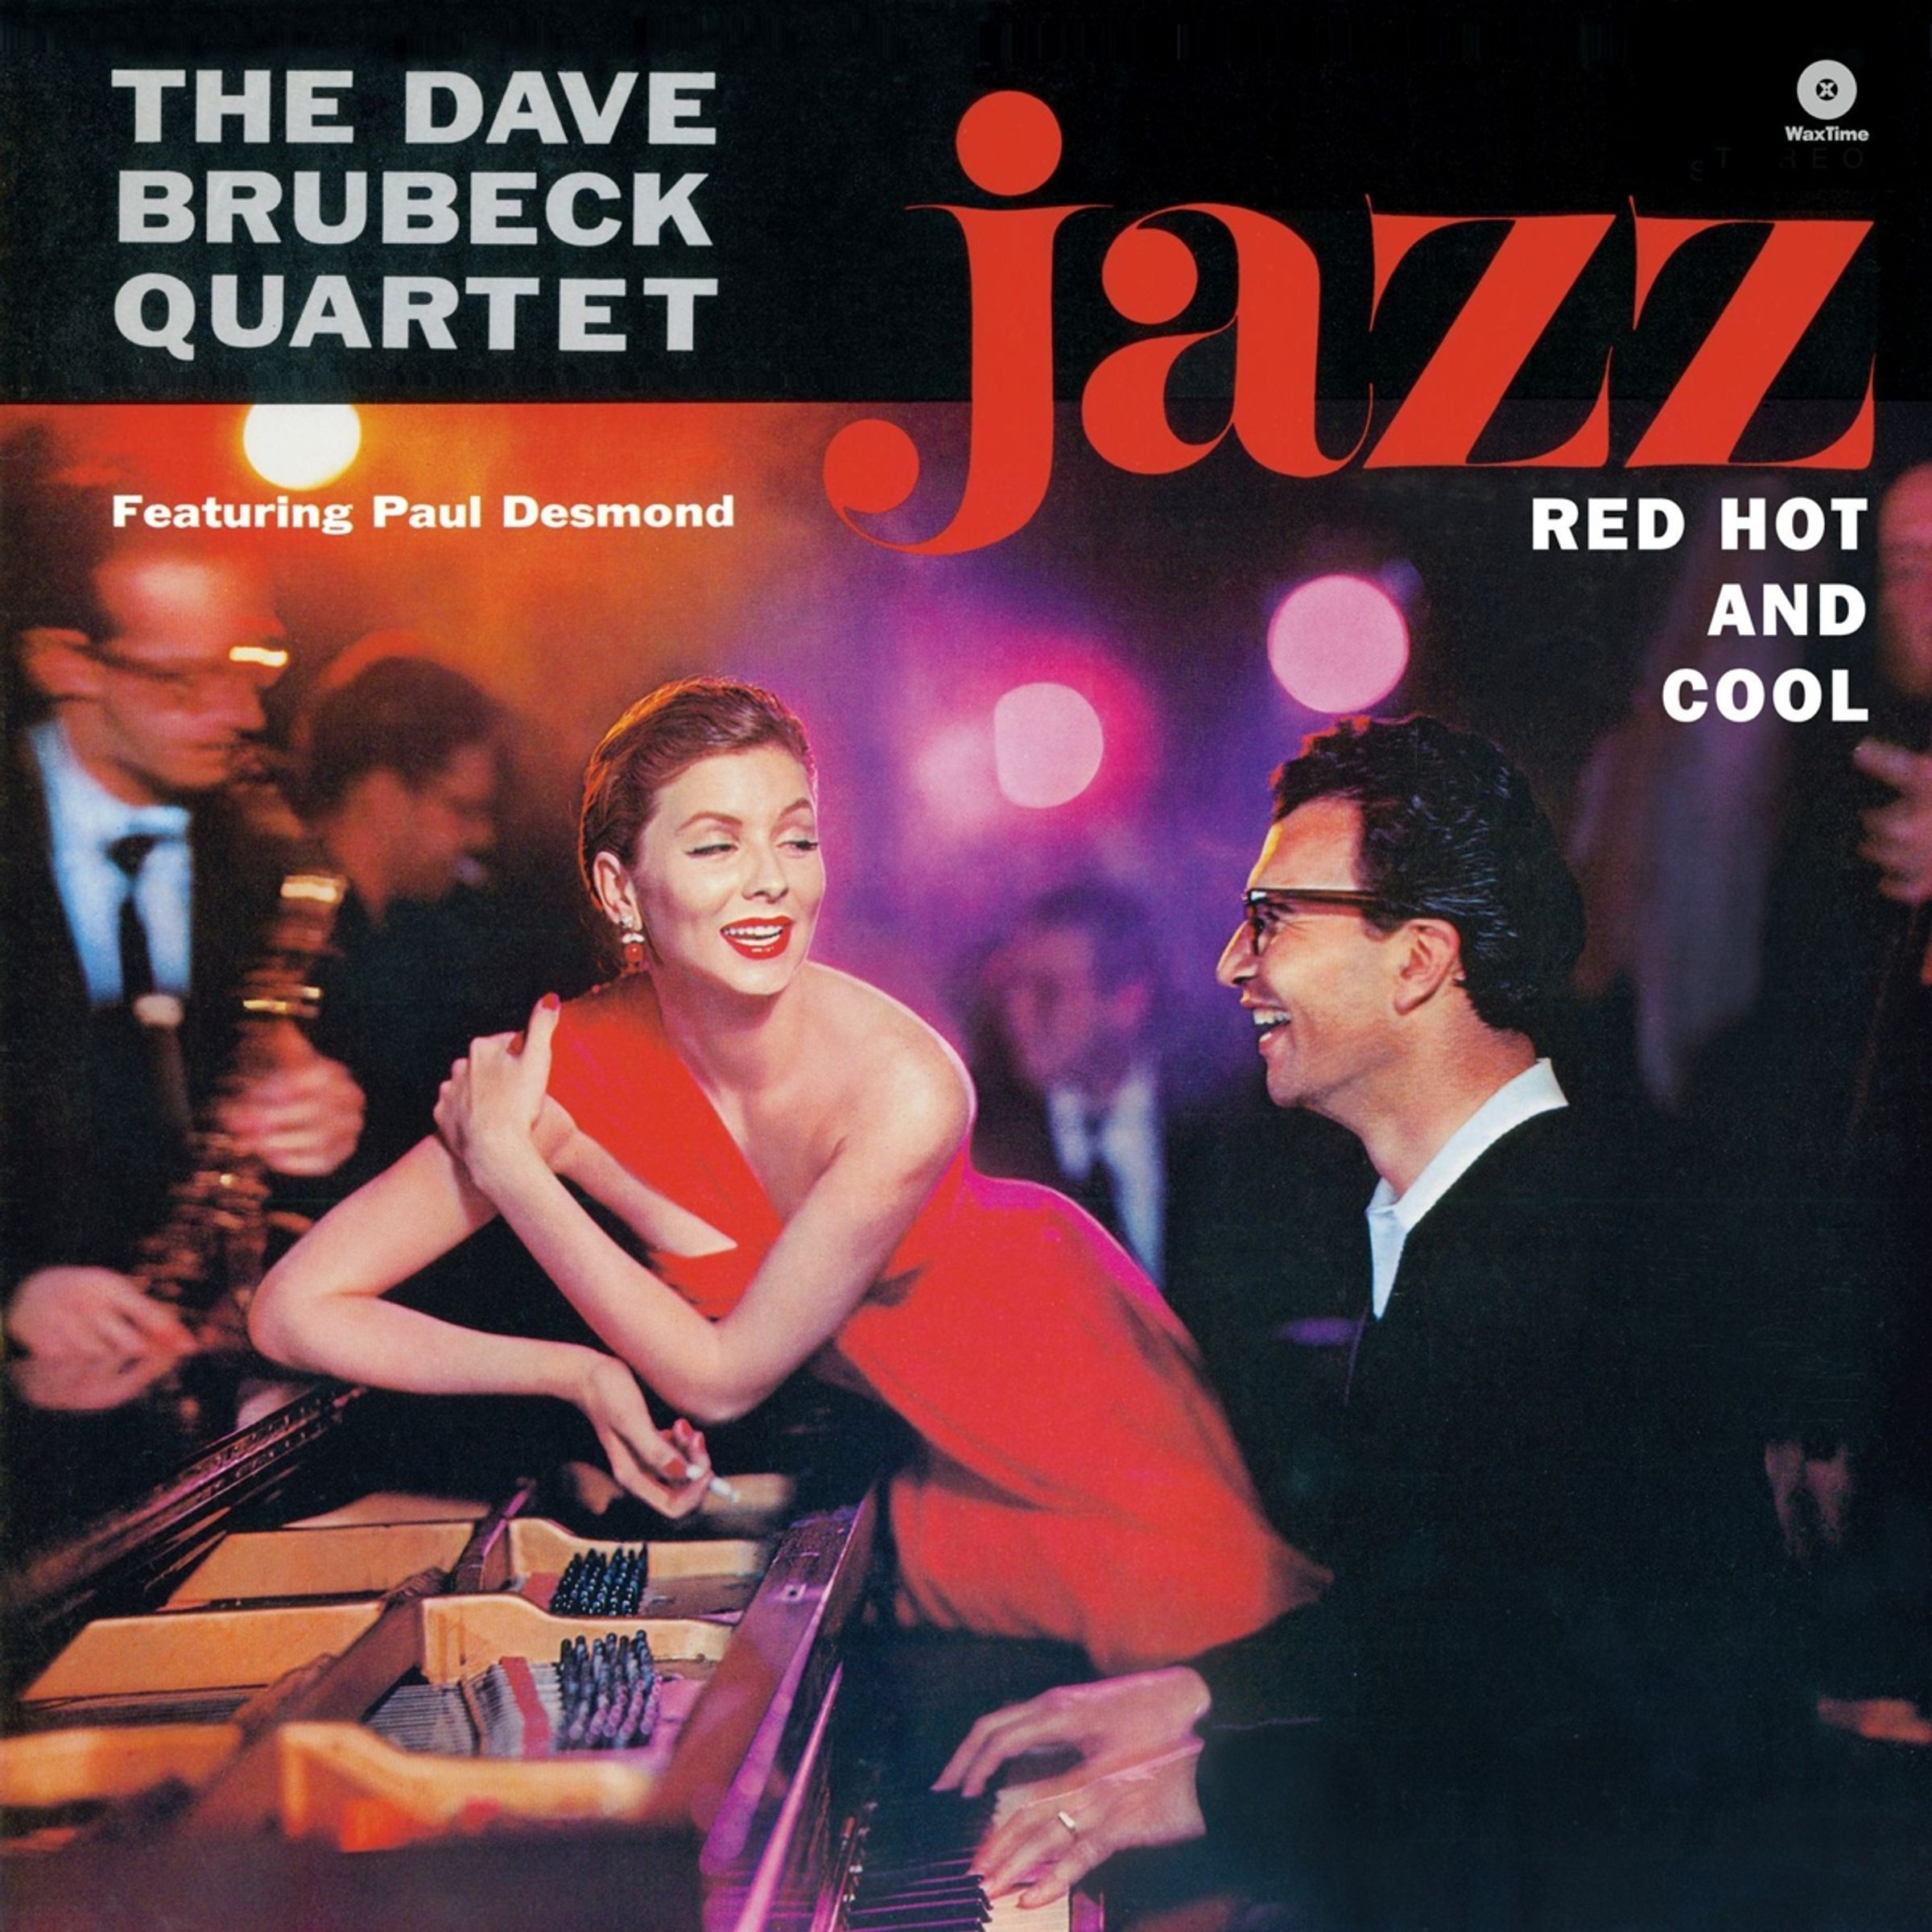 JAZZ: RED, HOT AND COOL (LIMITED EDITION)